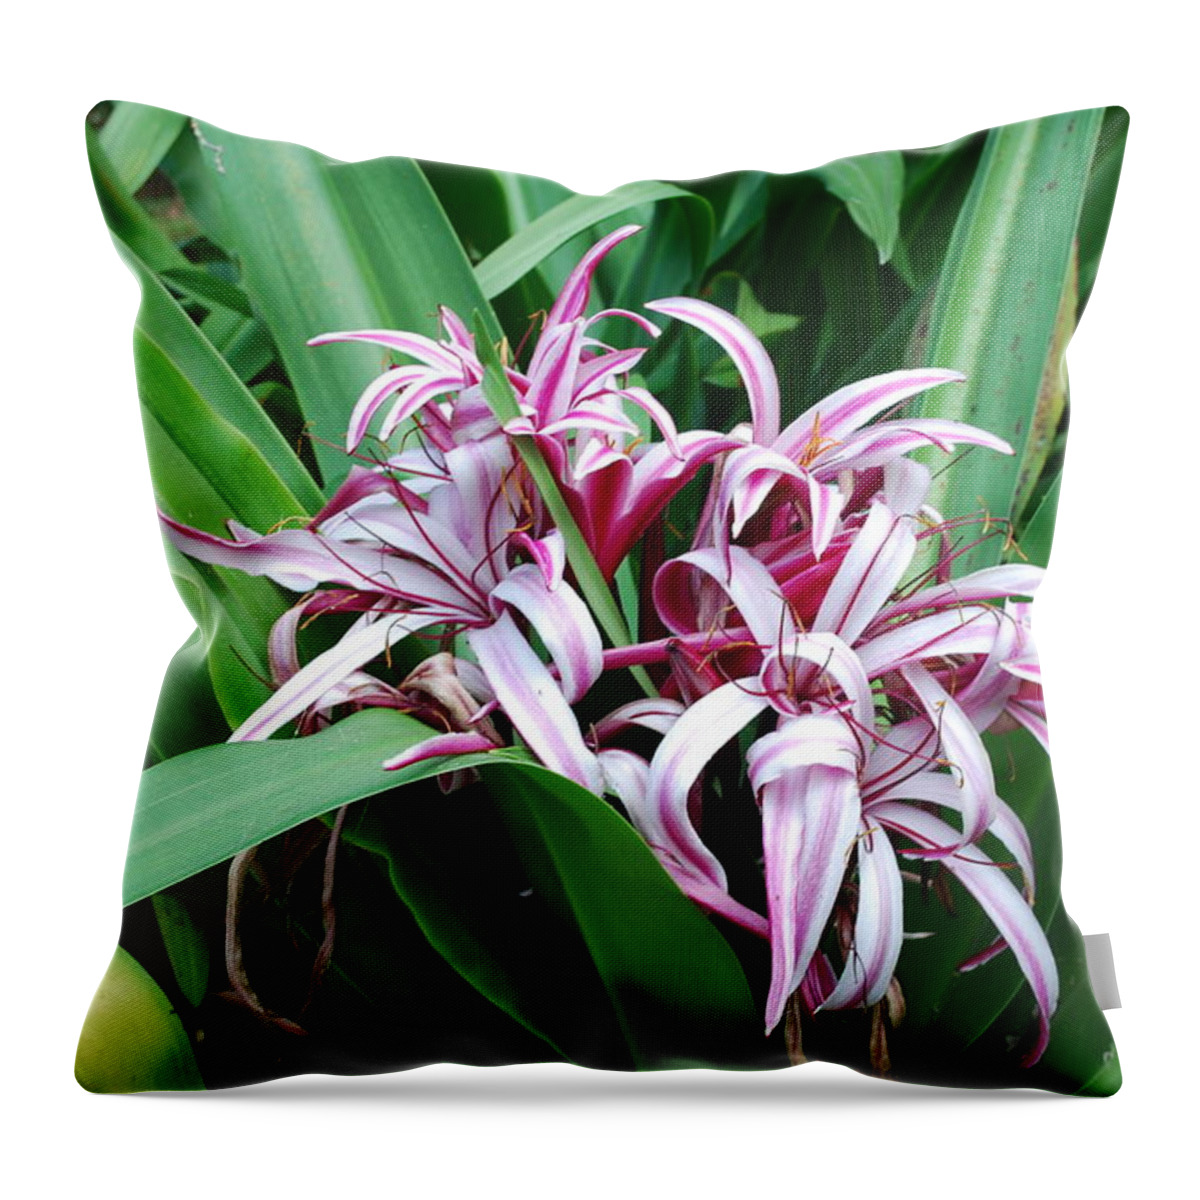 Tree Green Field Throw Pillow featuring the photograph Flor #3 by Rebeca Segura